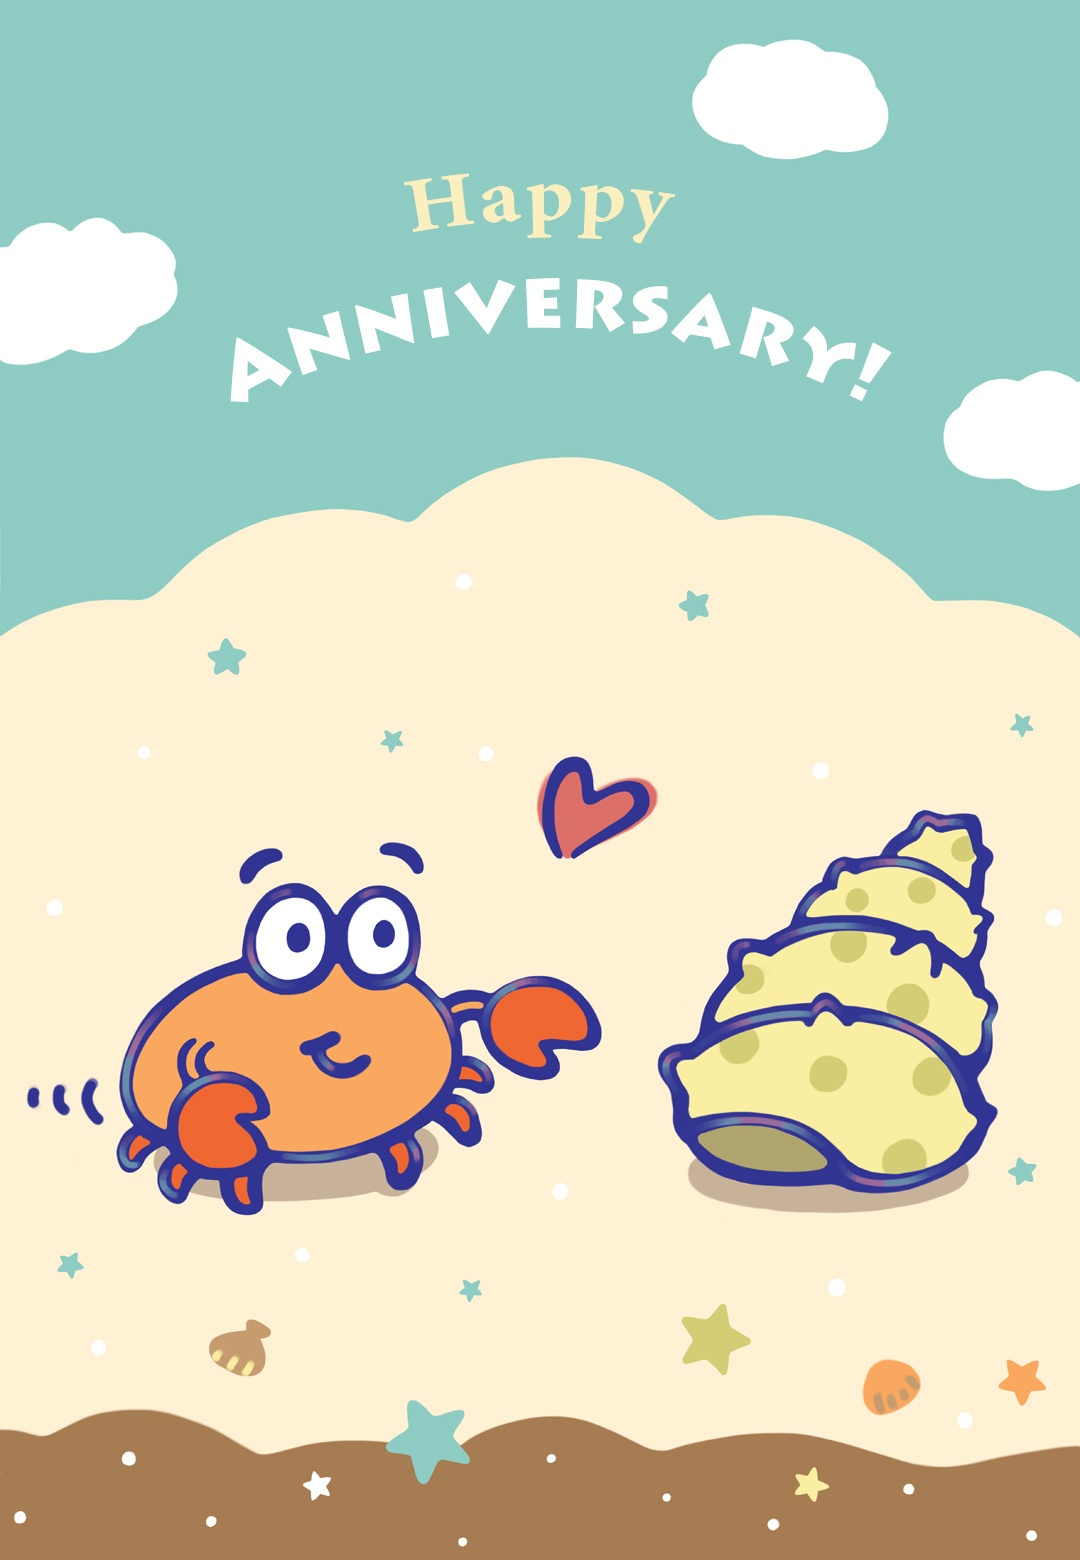 When I Found You - Happy Anniversary Card (Free) | Greetings Island - Printable Cards Free Anniversary